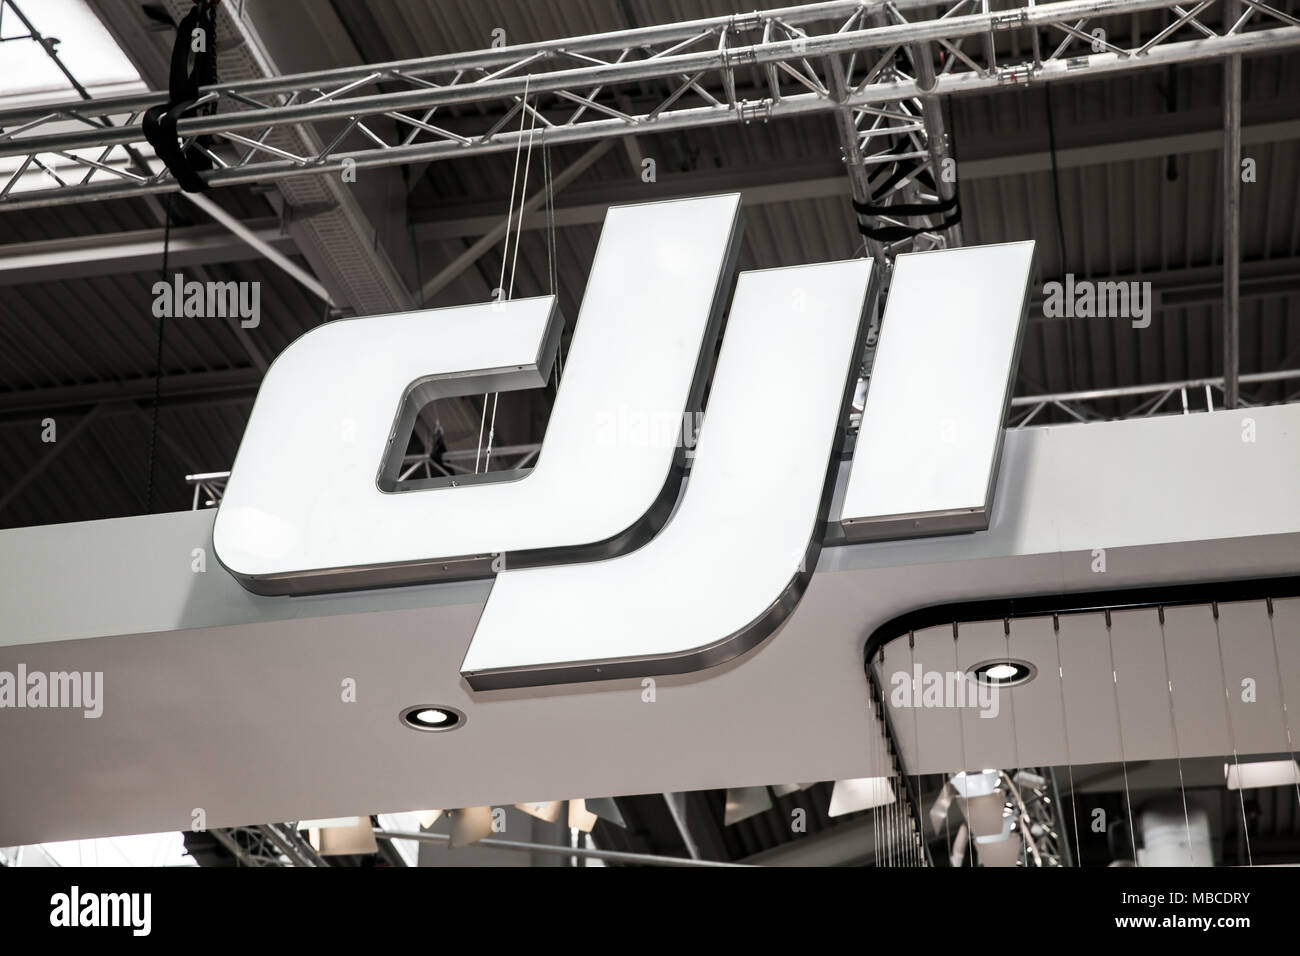 DJI company logo sign on exhibition fair Cebit 2017 in Hannover Messe, Germany Stock Photo